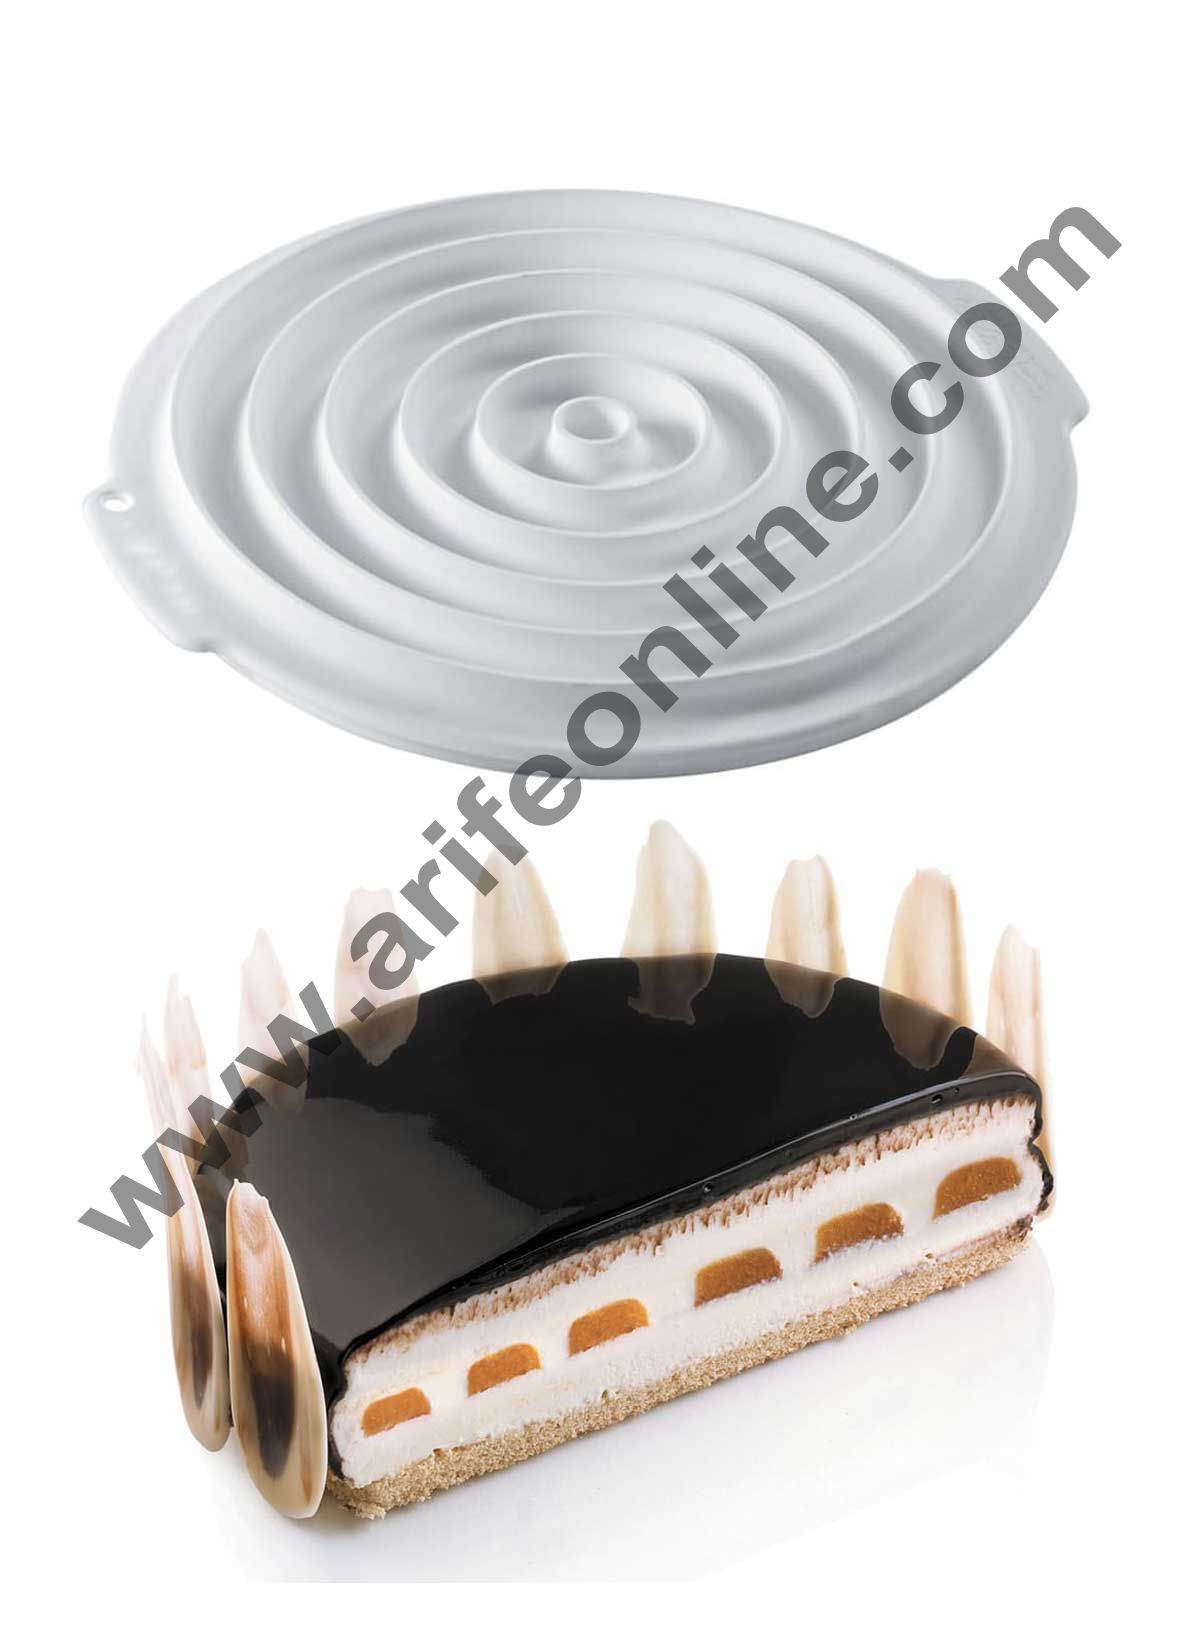 MoldBerry Big & Small Spiral Cake Mould , Spiral Design Round Ring